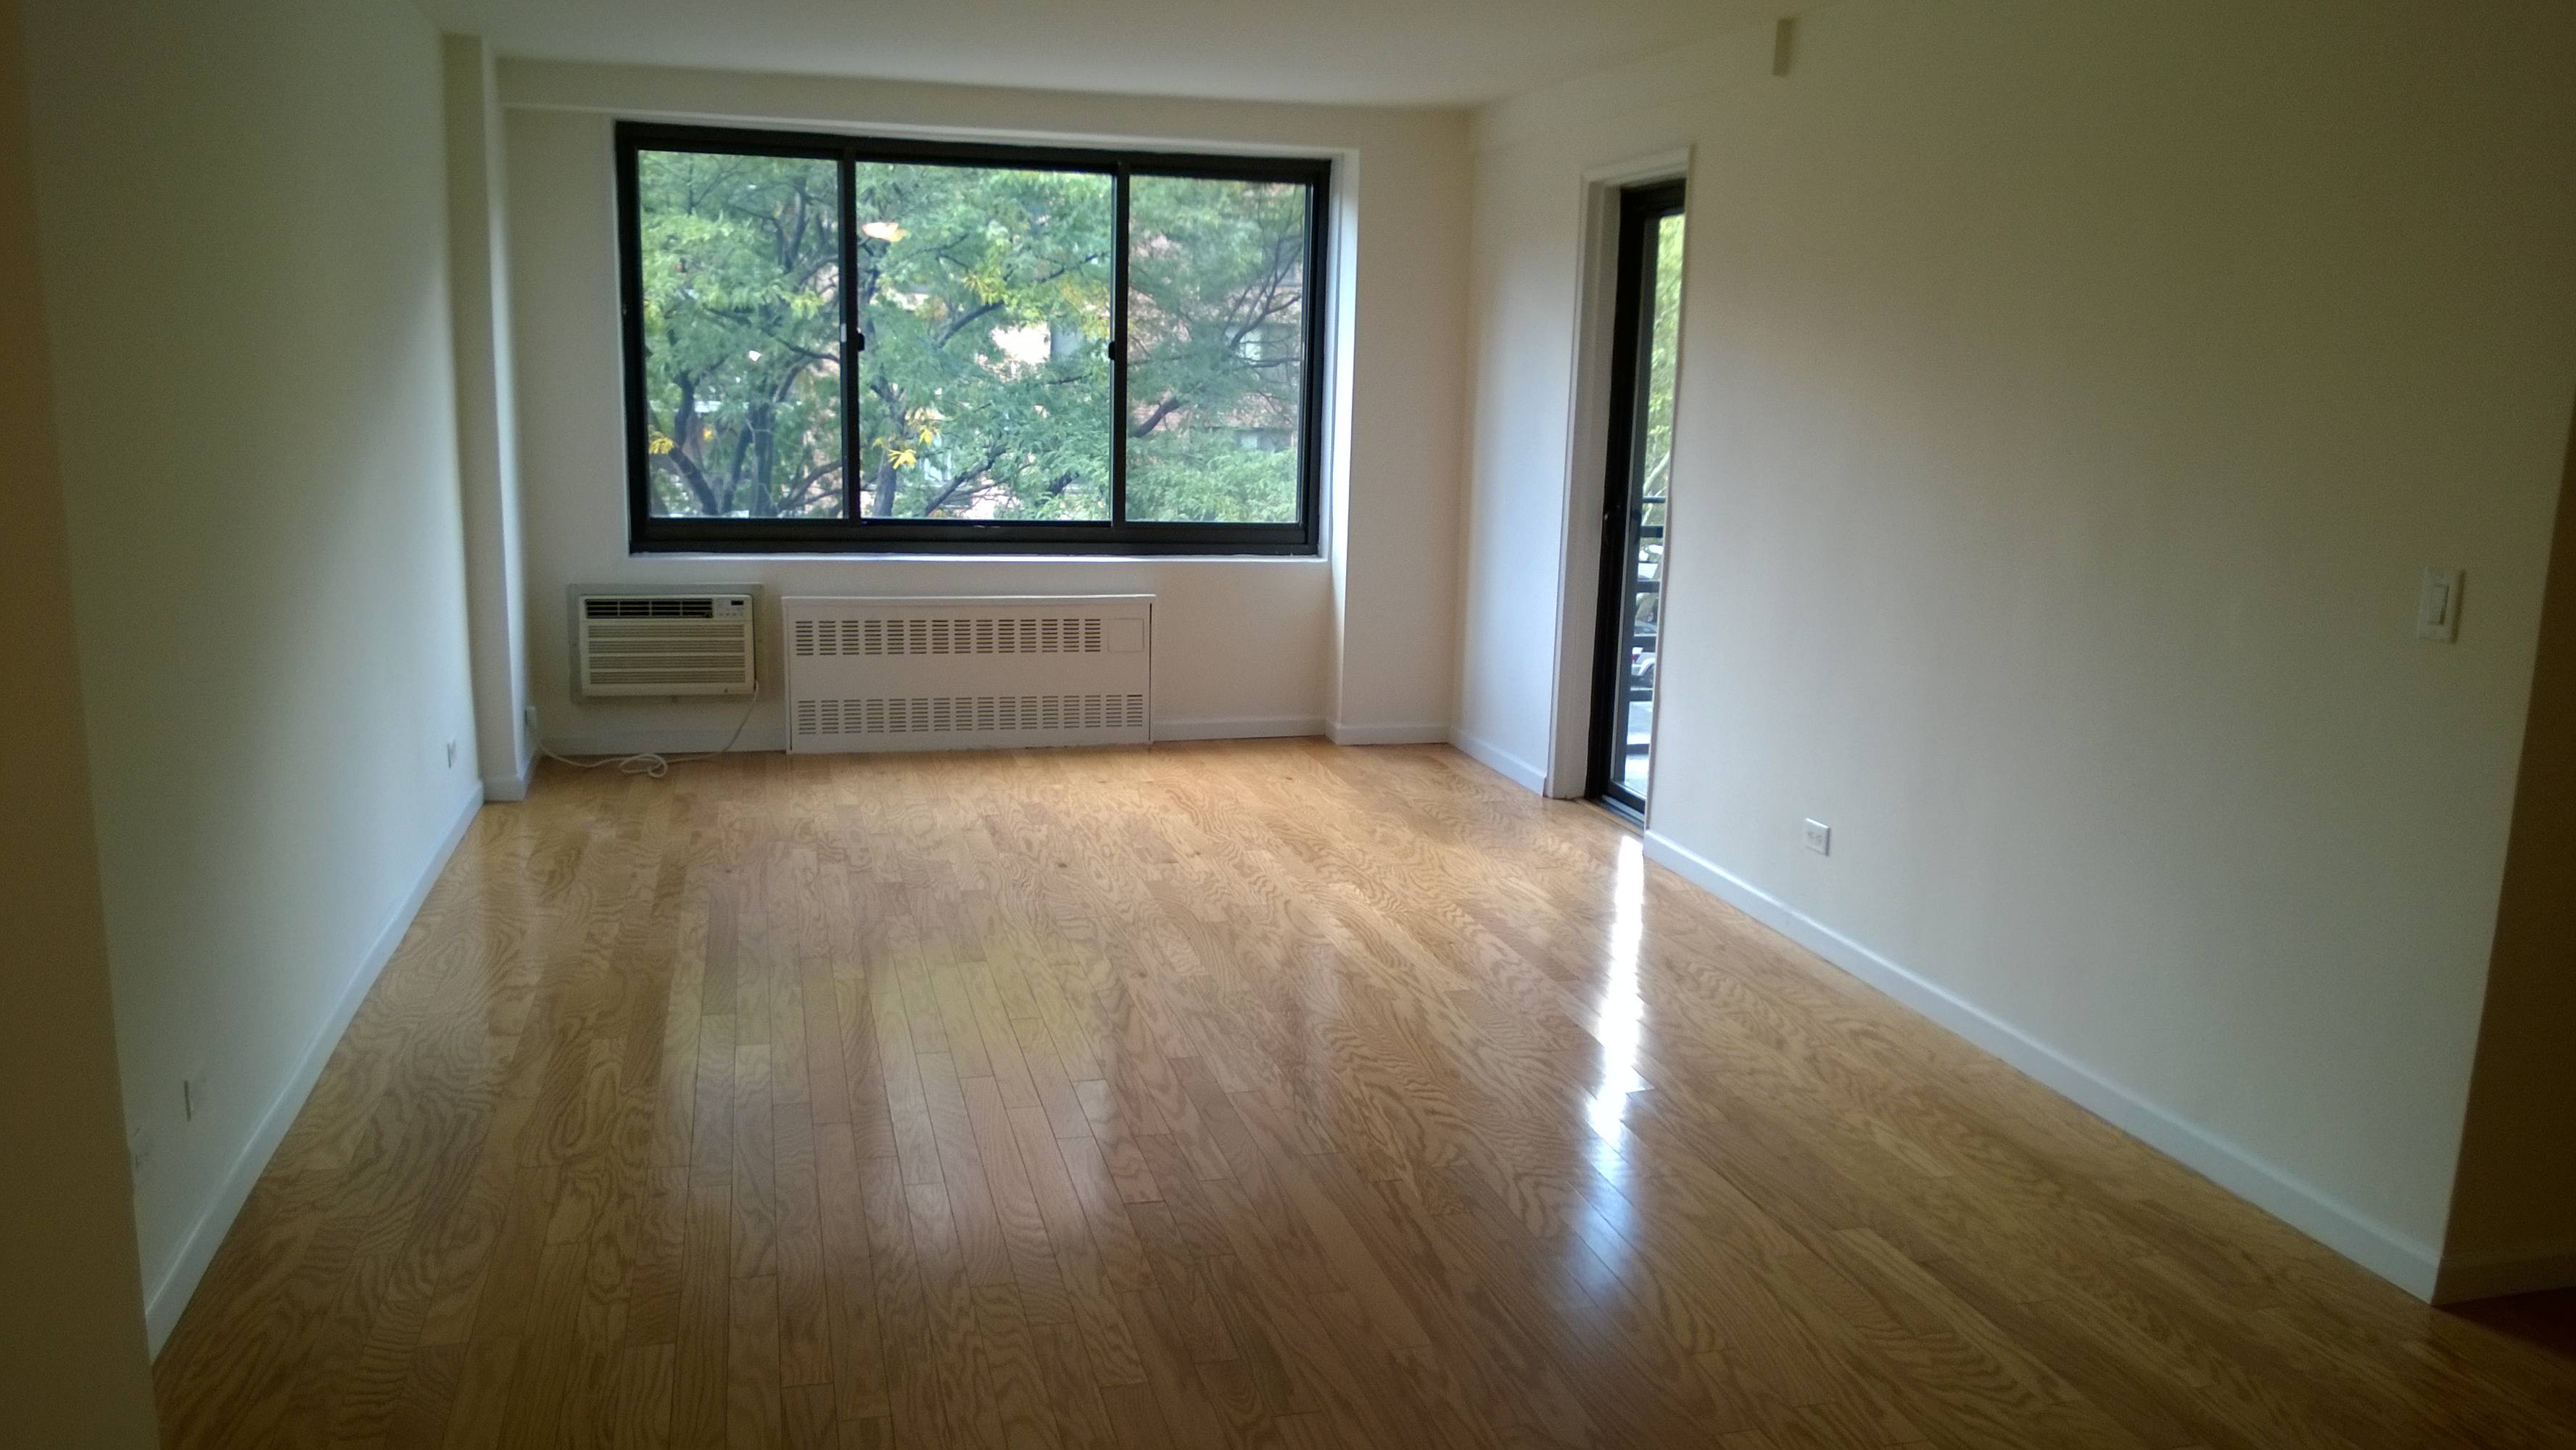 ★★★ ONE BEDROOM  Luxury  Renovated Apartments W/D WIC .. Superb Location at Harlem Best Address